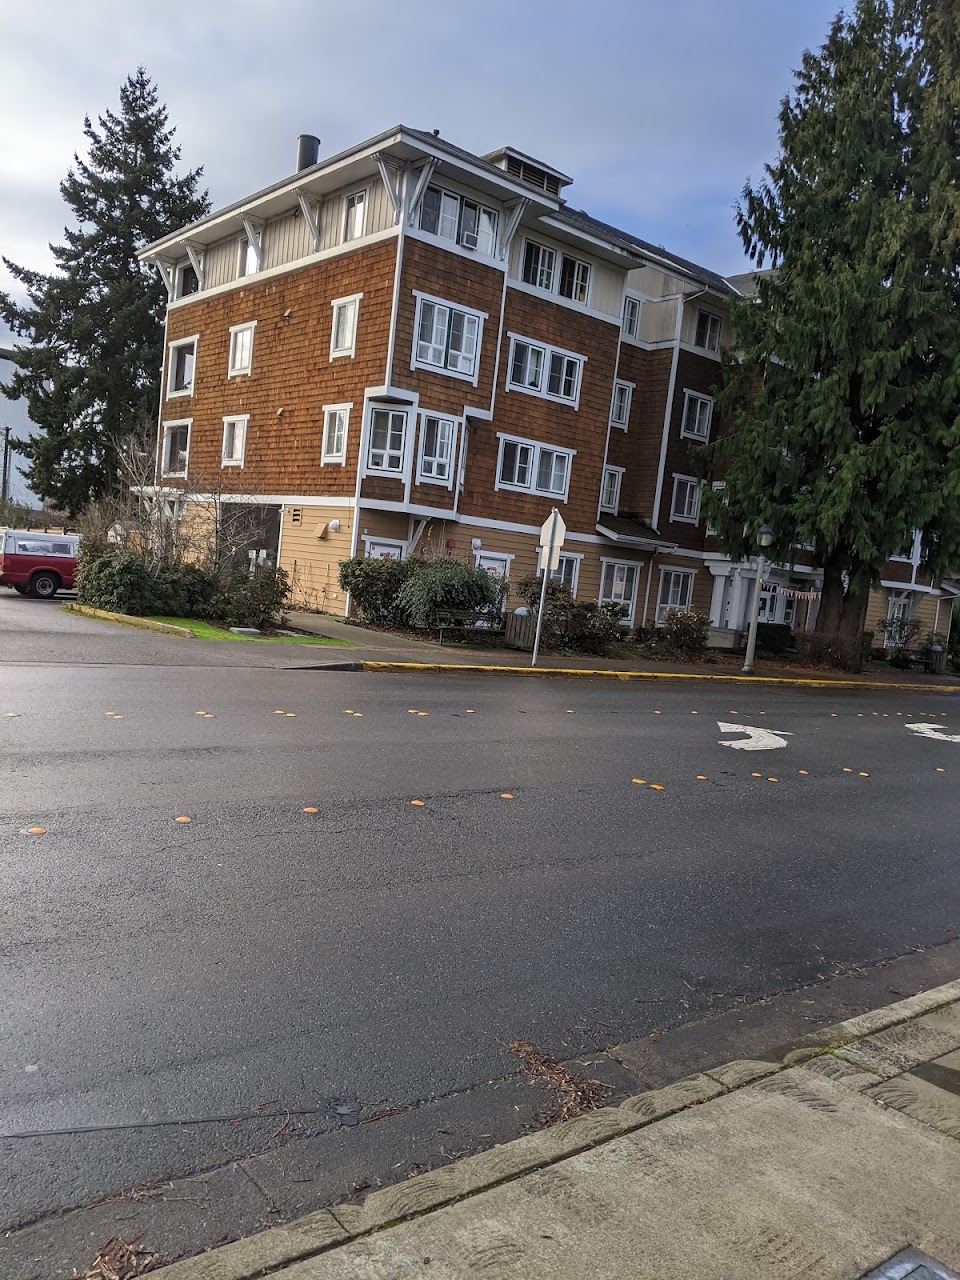 Photo of YWCA FAMILY VILLAGE. Affordable housing located at 16601 NE 80TH ST. REDMOND, WA 98052